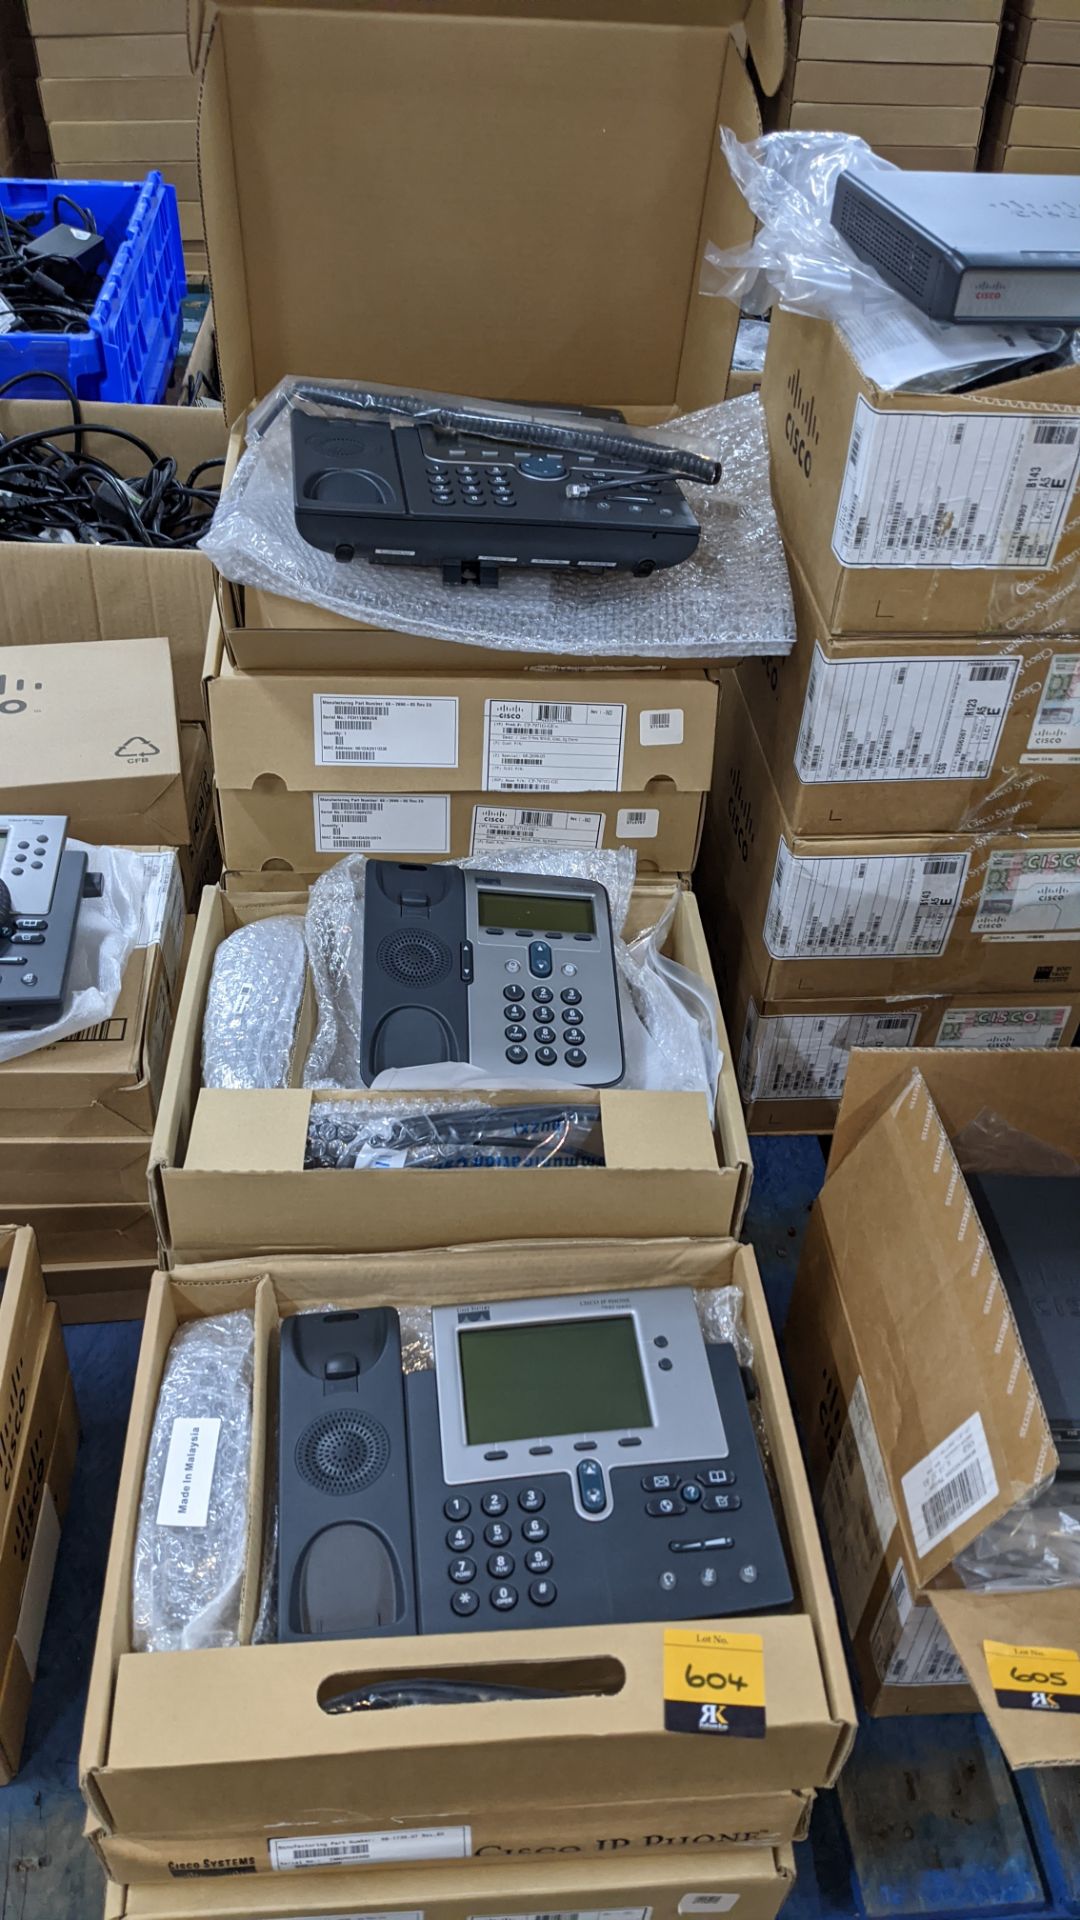 13 off Cisco handsets, model 7940, 7911 & 7971. Appear to be new & unused in Cisco branded boxes - Image 2 of 6